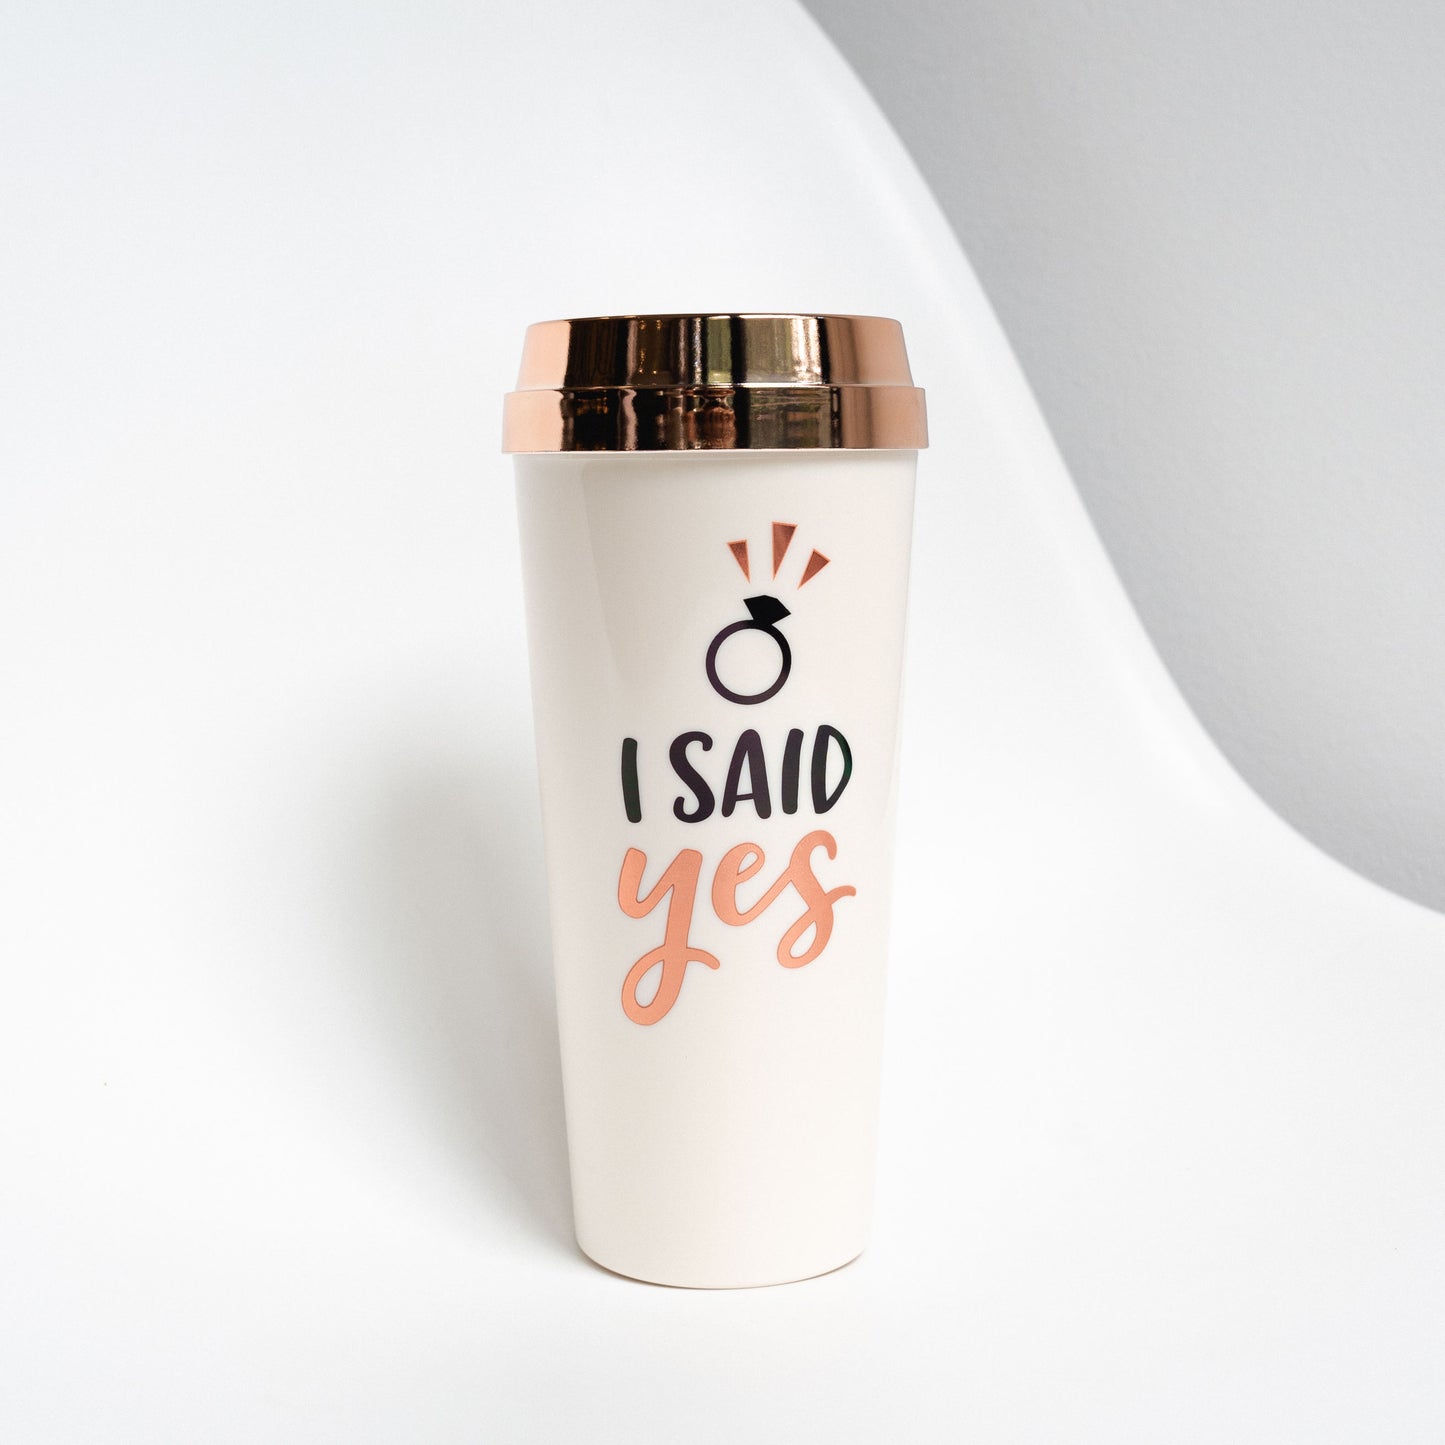 I Said Yes Tumbler that can hold 17 oz of your favorite beverage. Features a cute engagement ring icon.